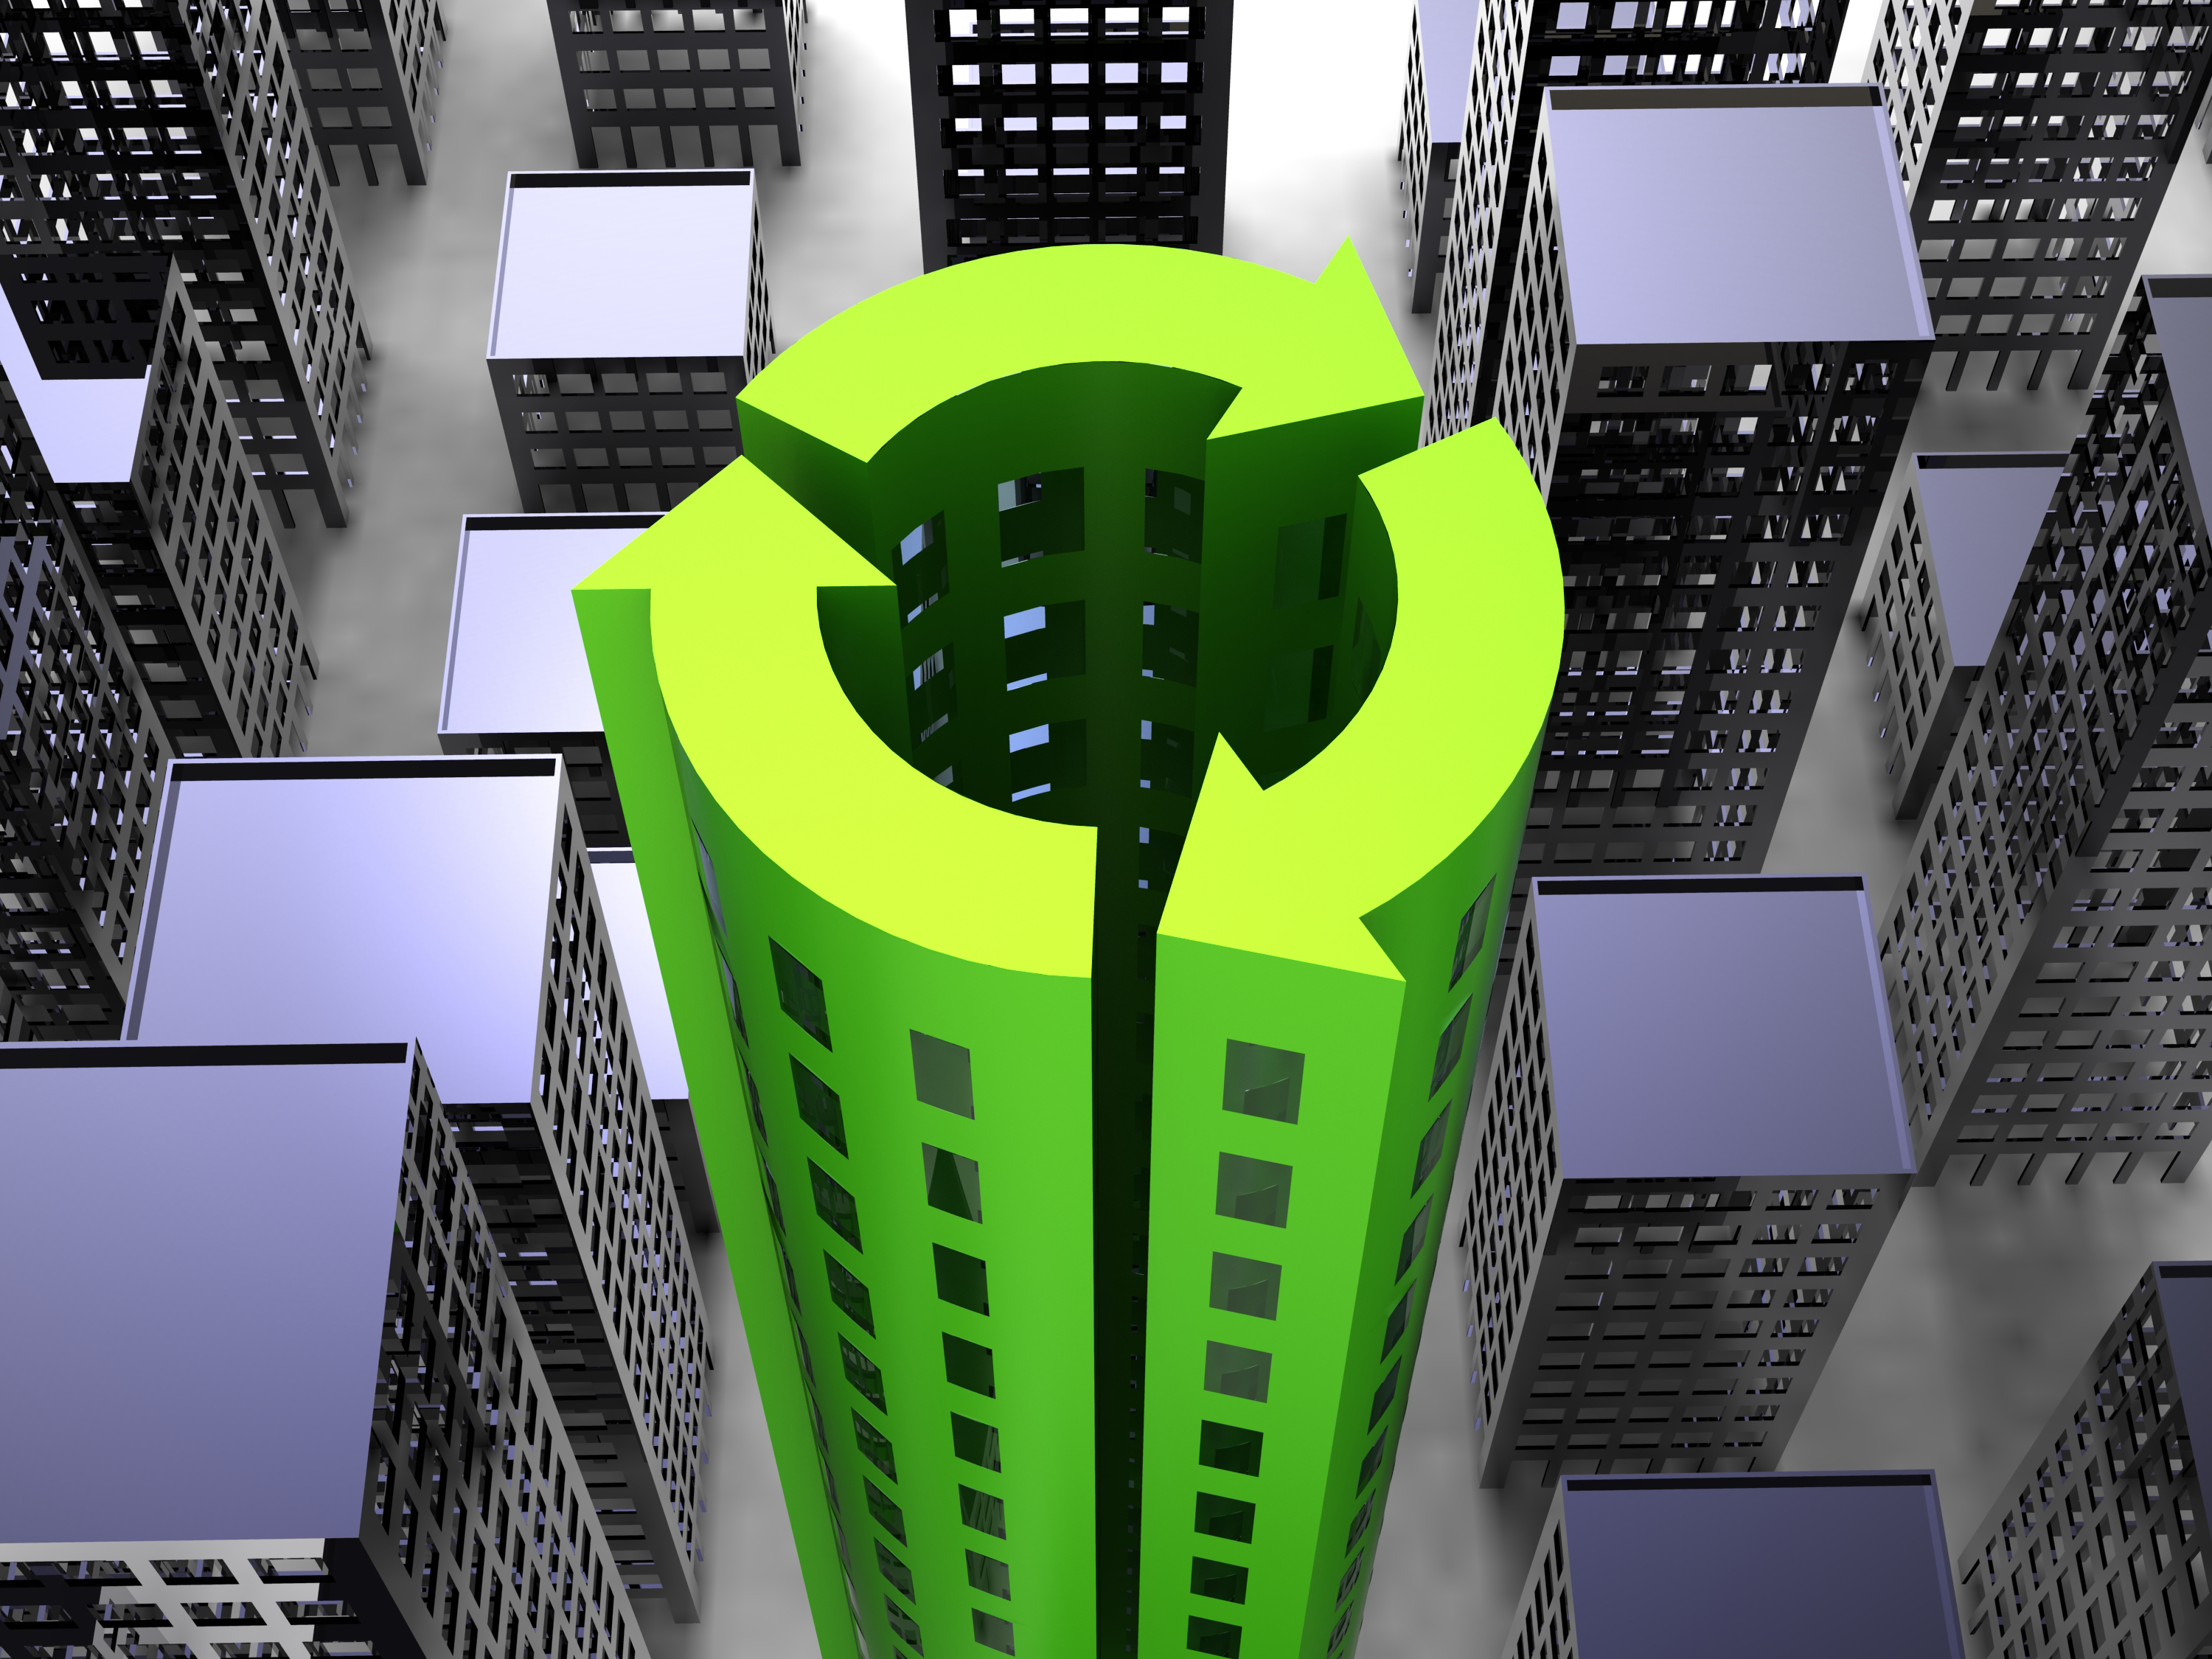 A green recycling symbol surrounded by tall buildings